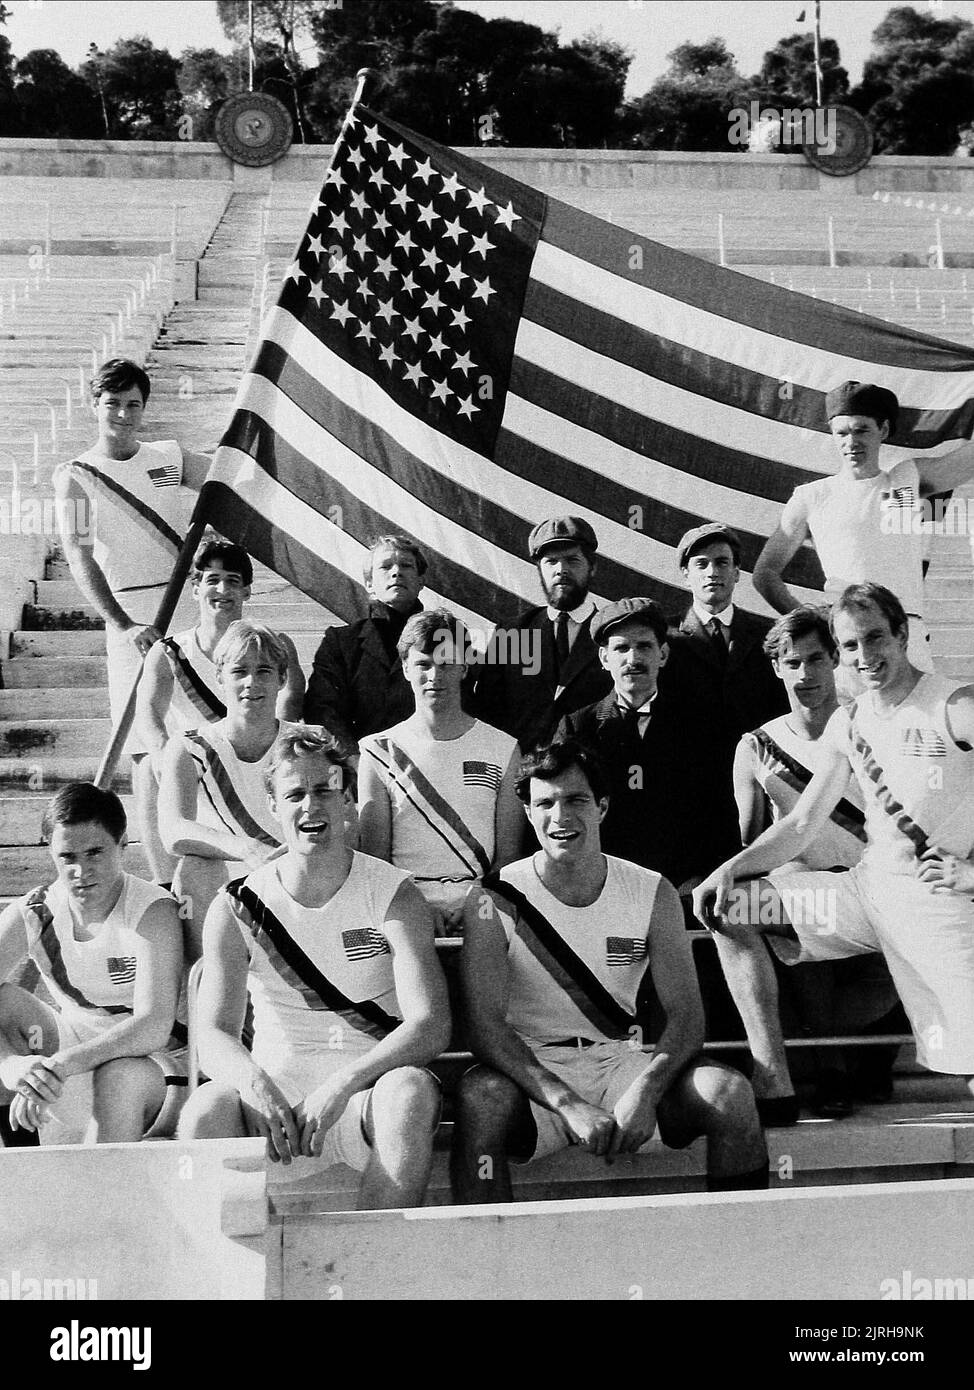 MORTON,FREWER,SWARTZ,ARMSTRONG,CONNERY,COBB,WILEY,BLOCK,EDWARDS,GILLIAM,MERRILL,CONDER,HYDE-WHITE,CARUSO, THE FIRST OLYMPICS: ATHENS 1896, 1984 Stock Photo